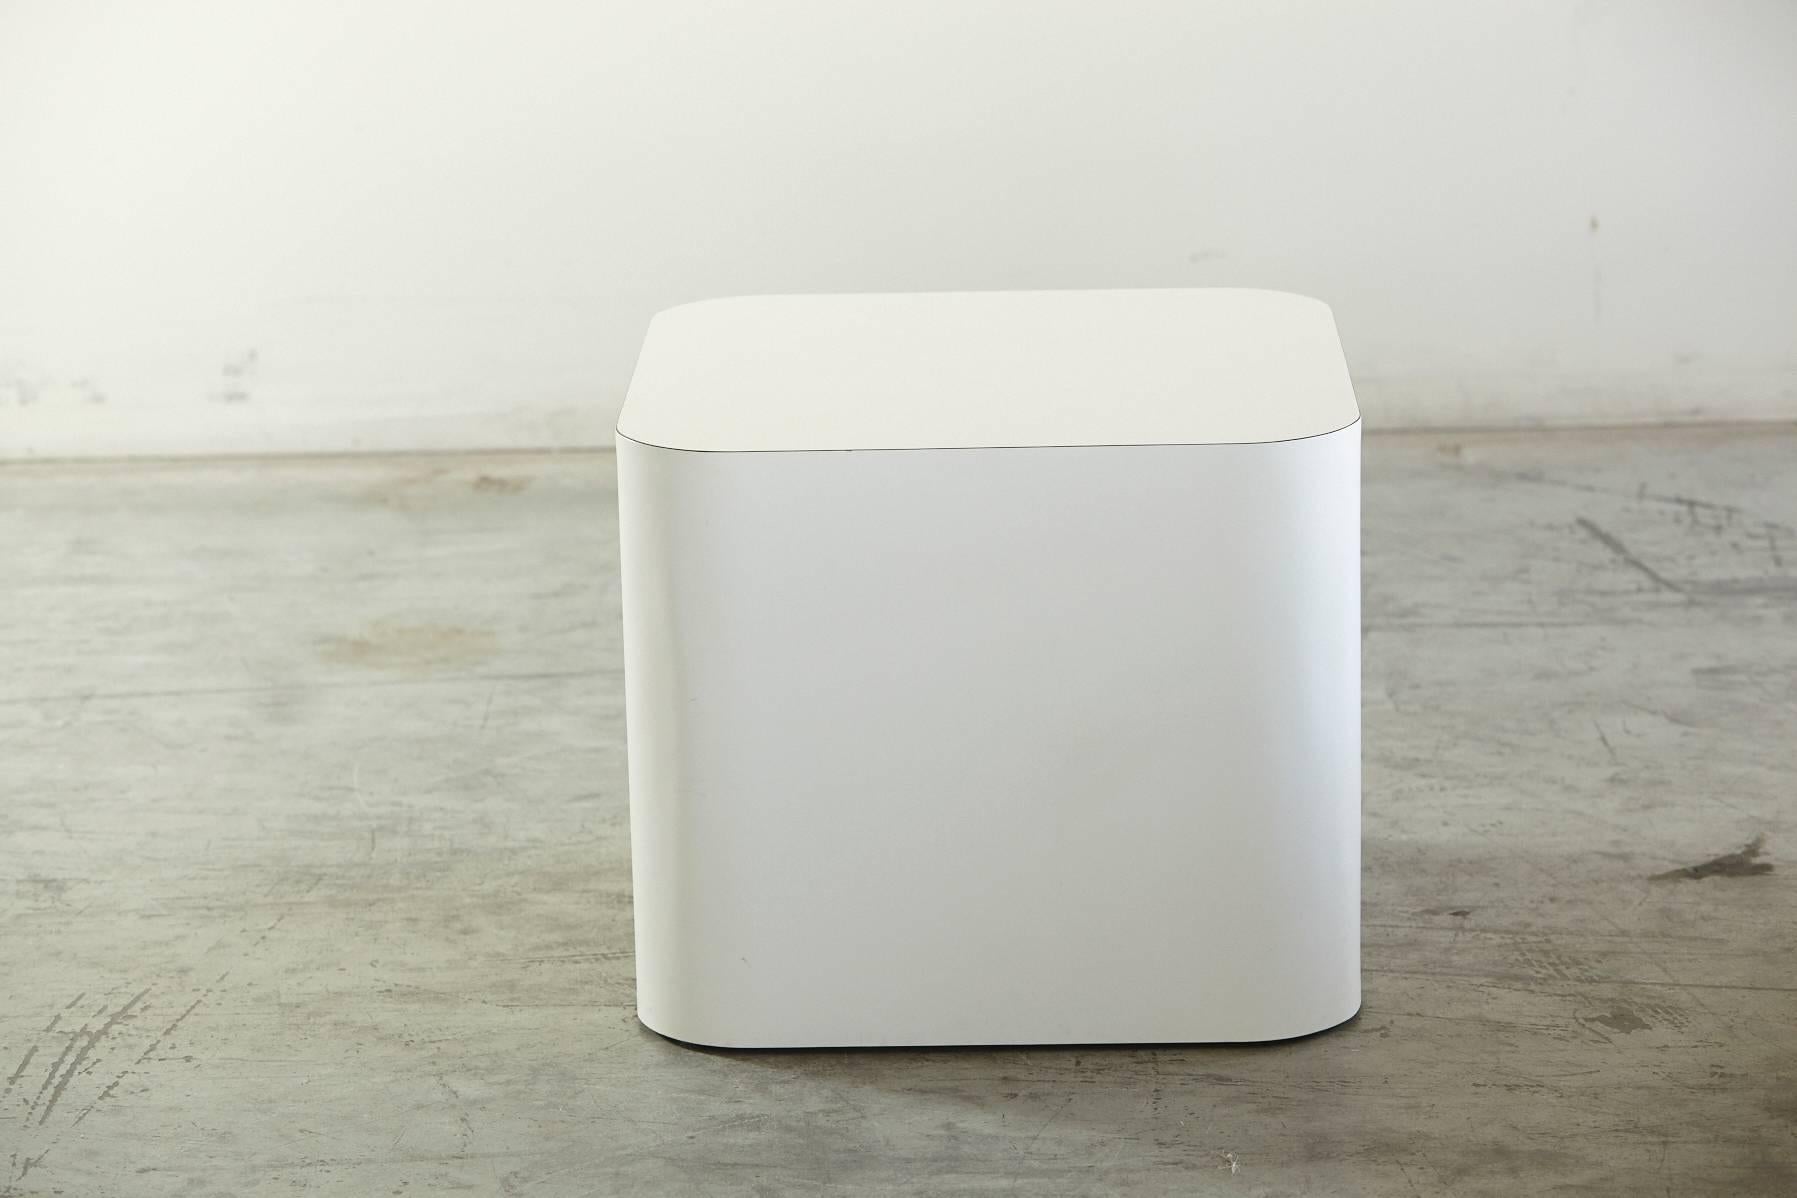 Custom-made white laminate cubic end table, pedestal, or display table.
The laminate is pure white and not yellowed.
 A simple, clean, minimalistic table.